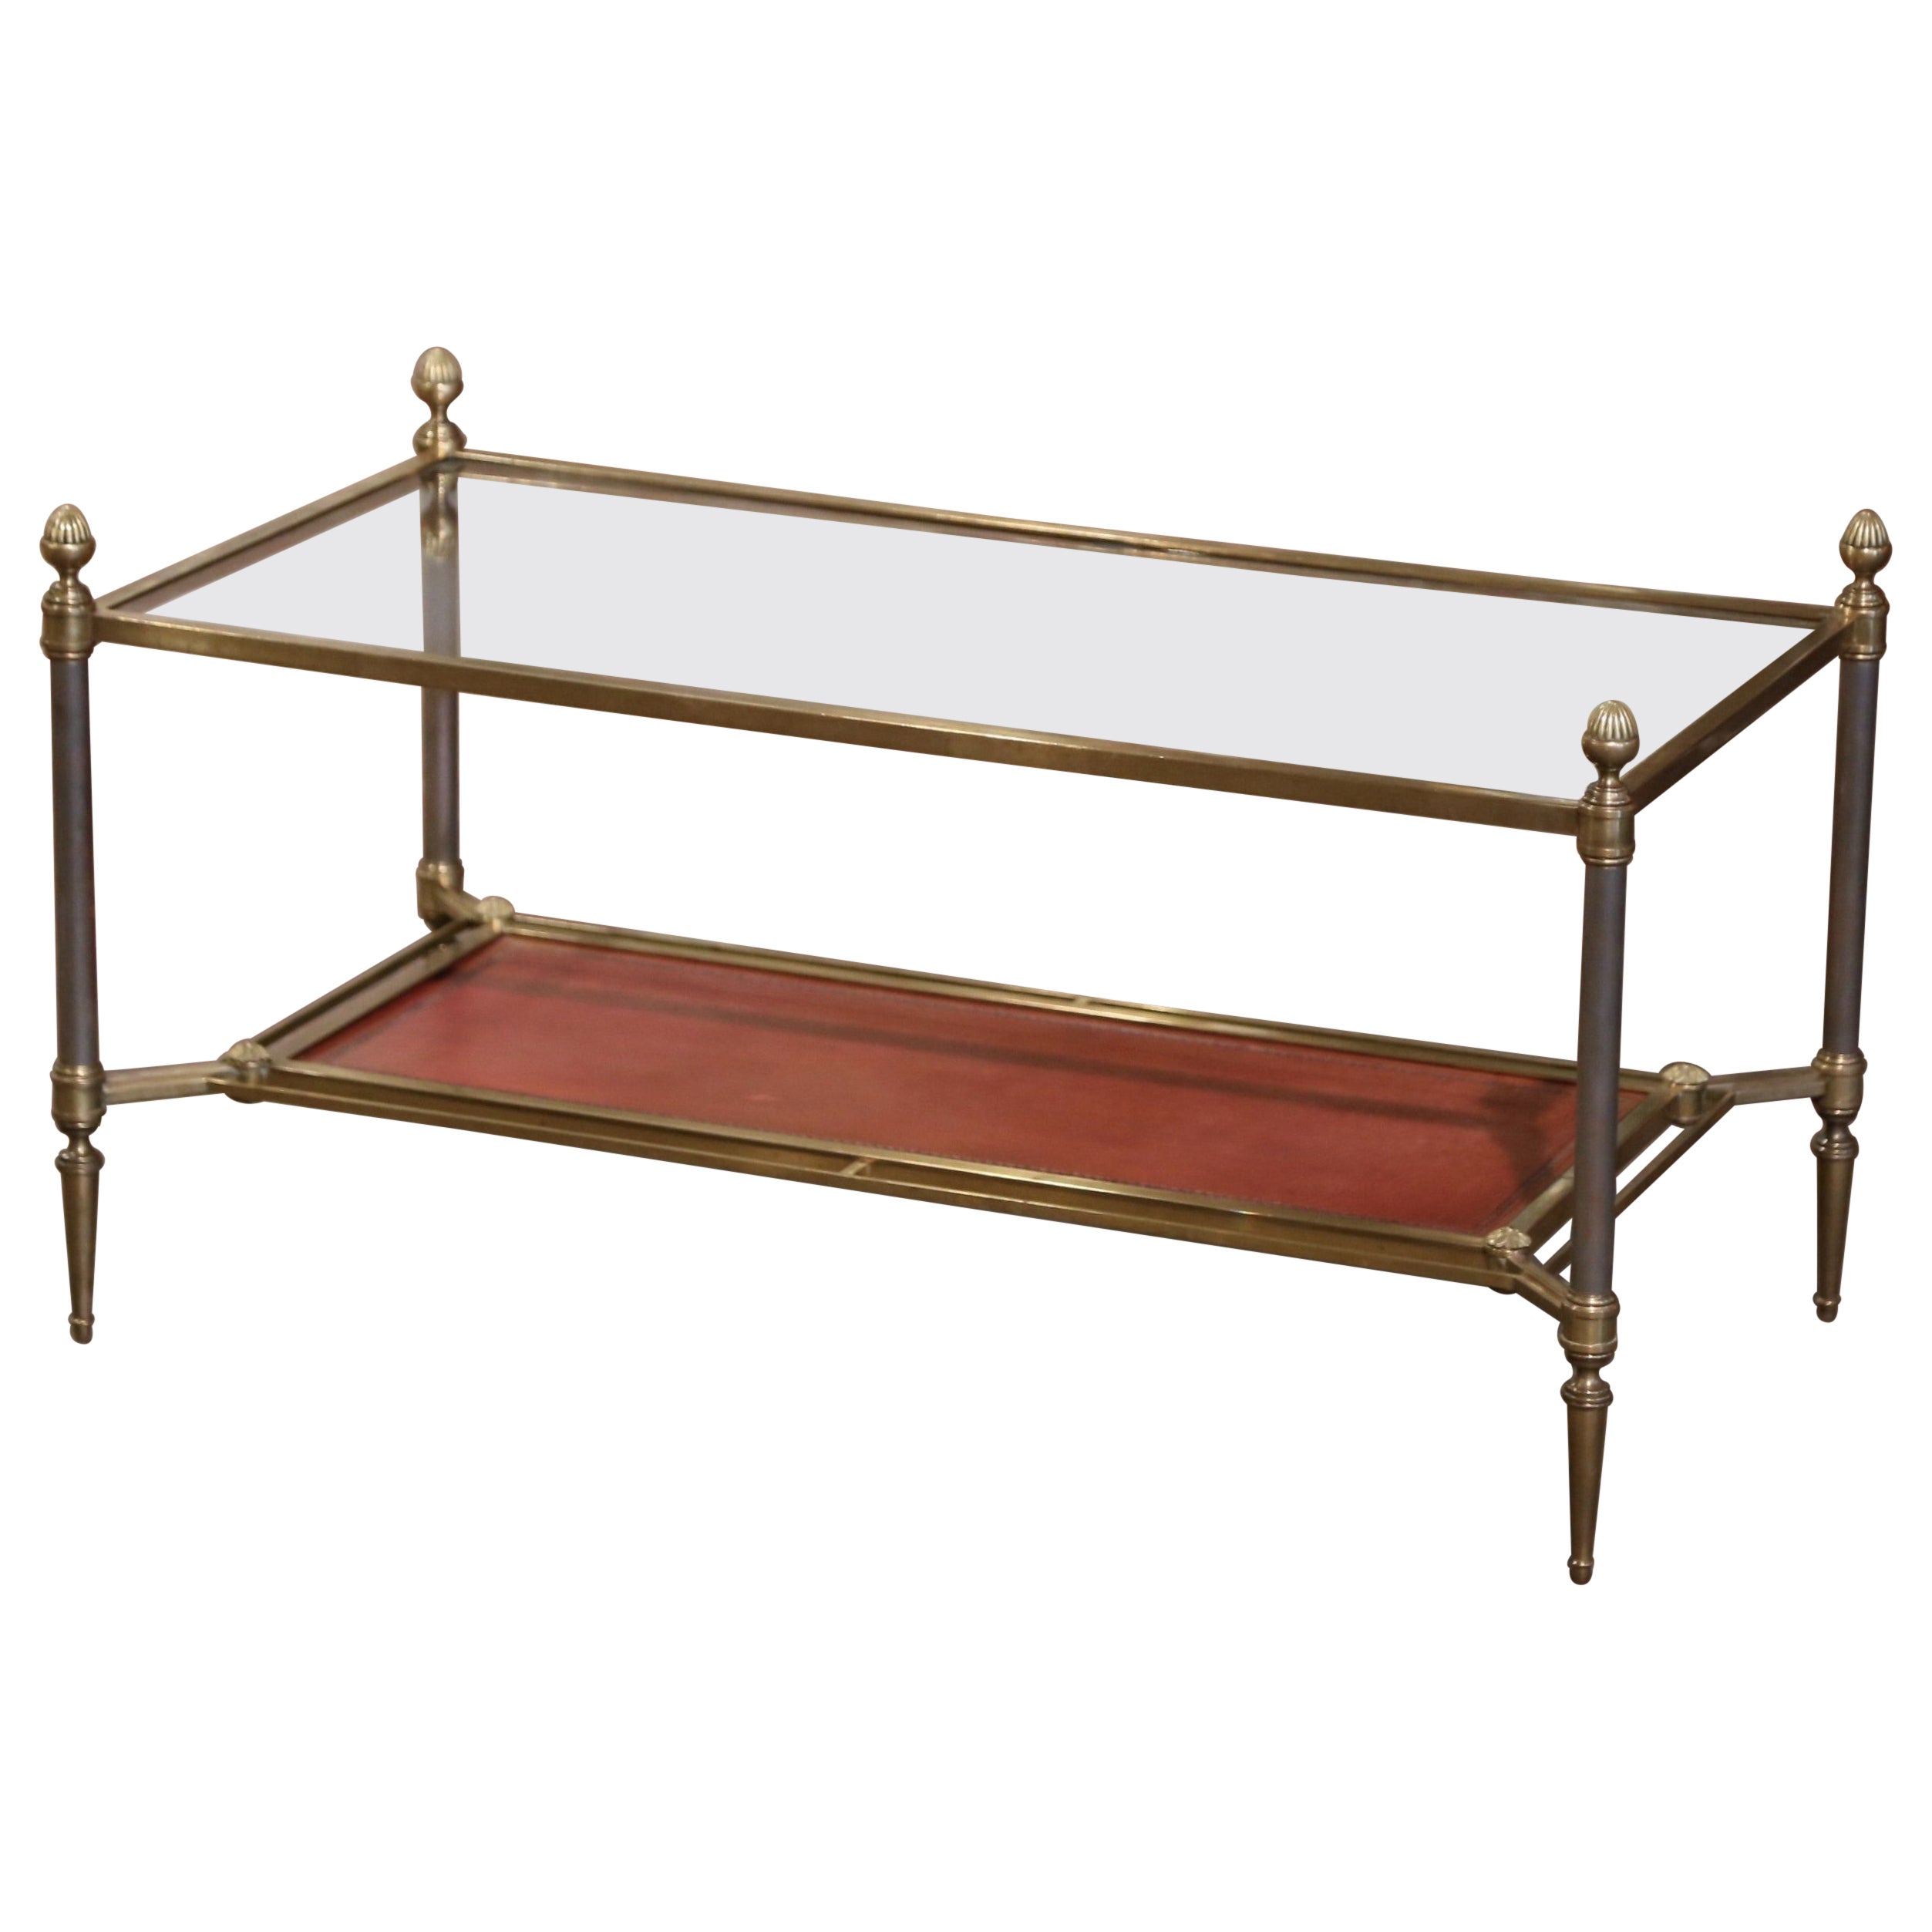 Mid-Century French Bronze and Leather Two-Tier Coffee Table from Maison Jansen